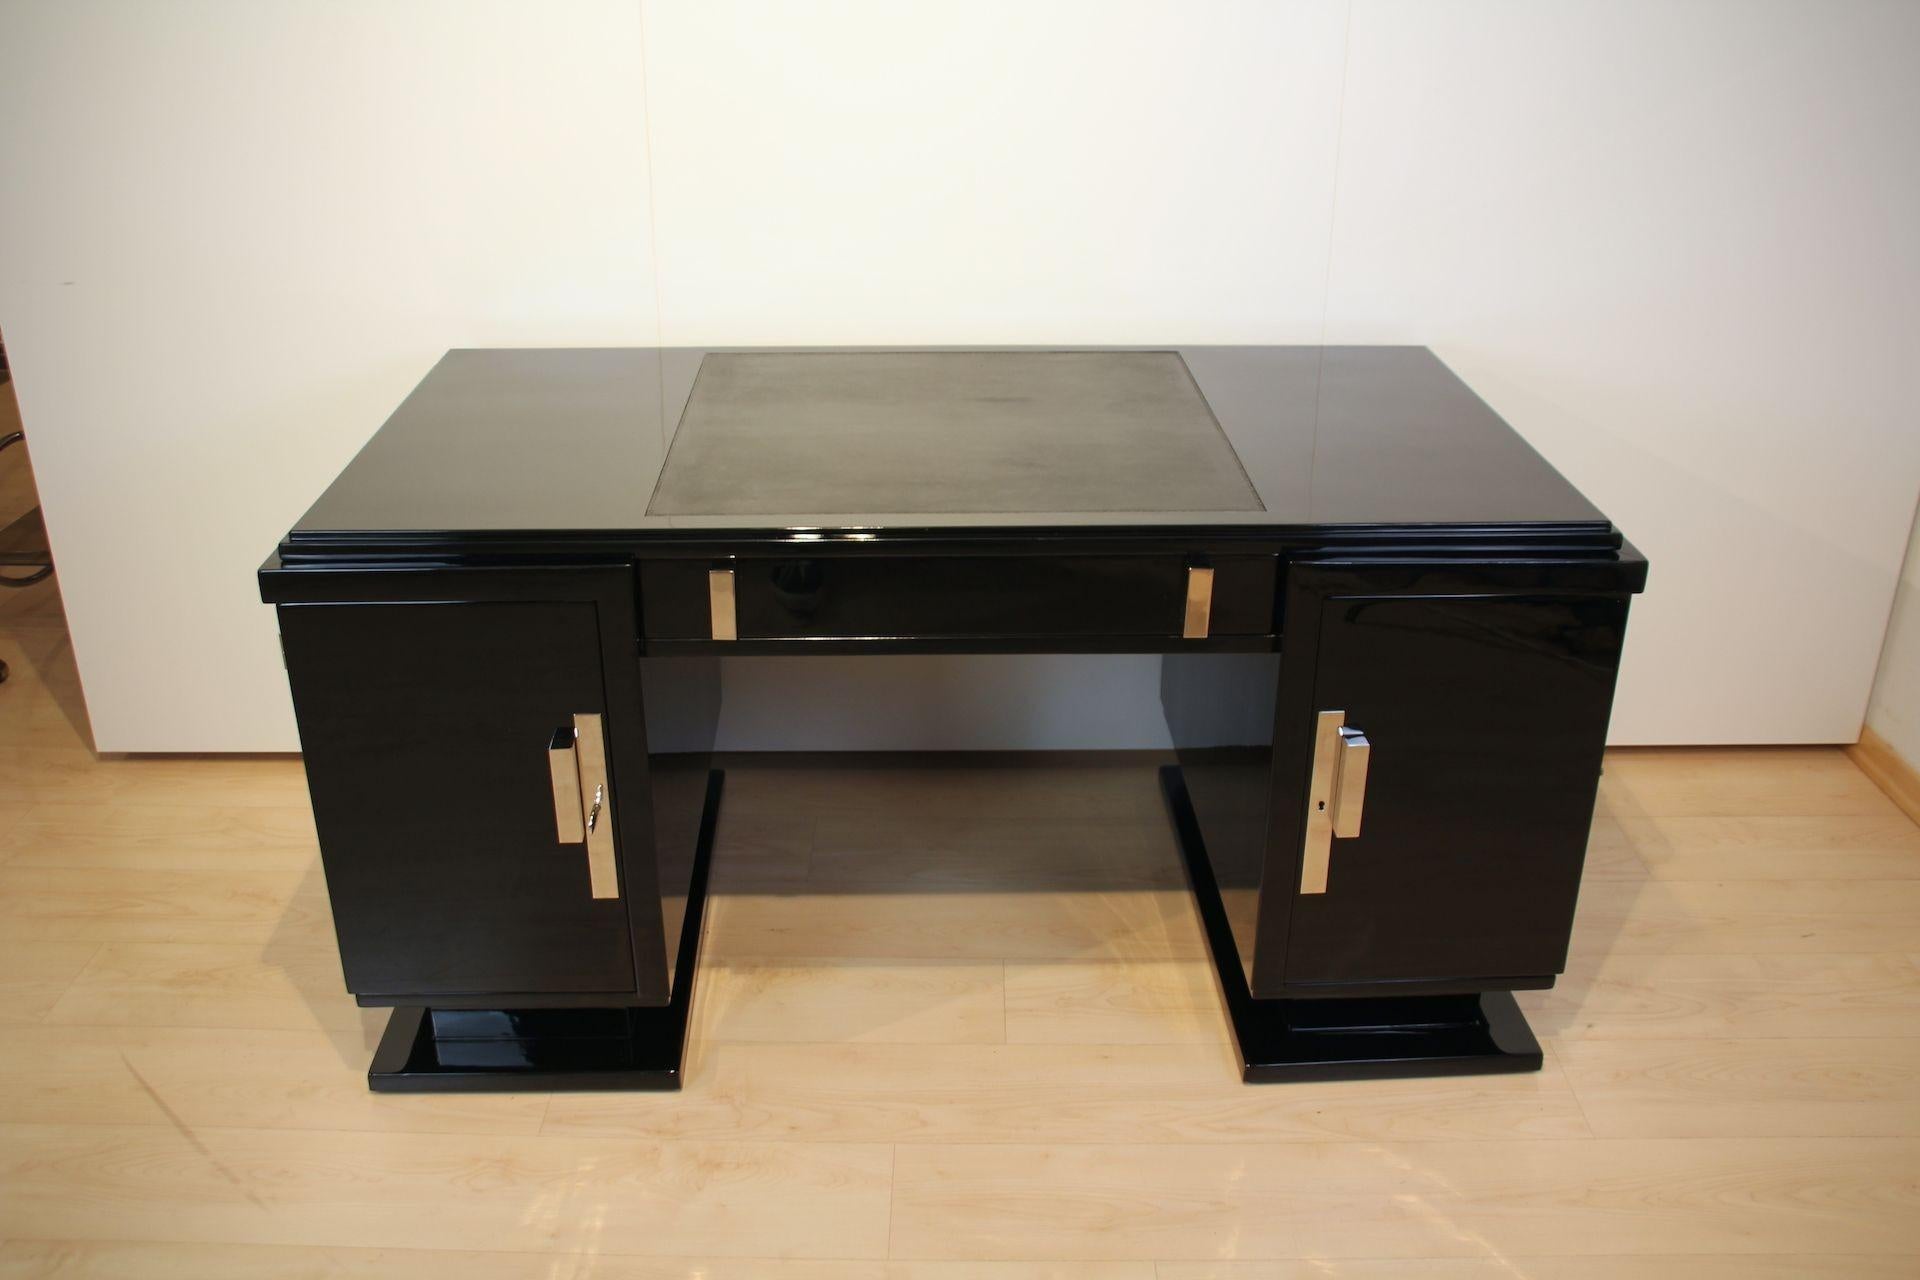 Polished Art Deco Desk, Black Lacquer, Leather, Nickel, France circa 1930 For Sale